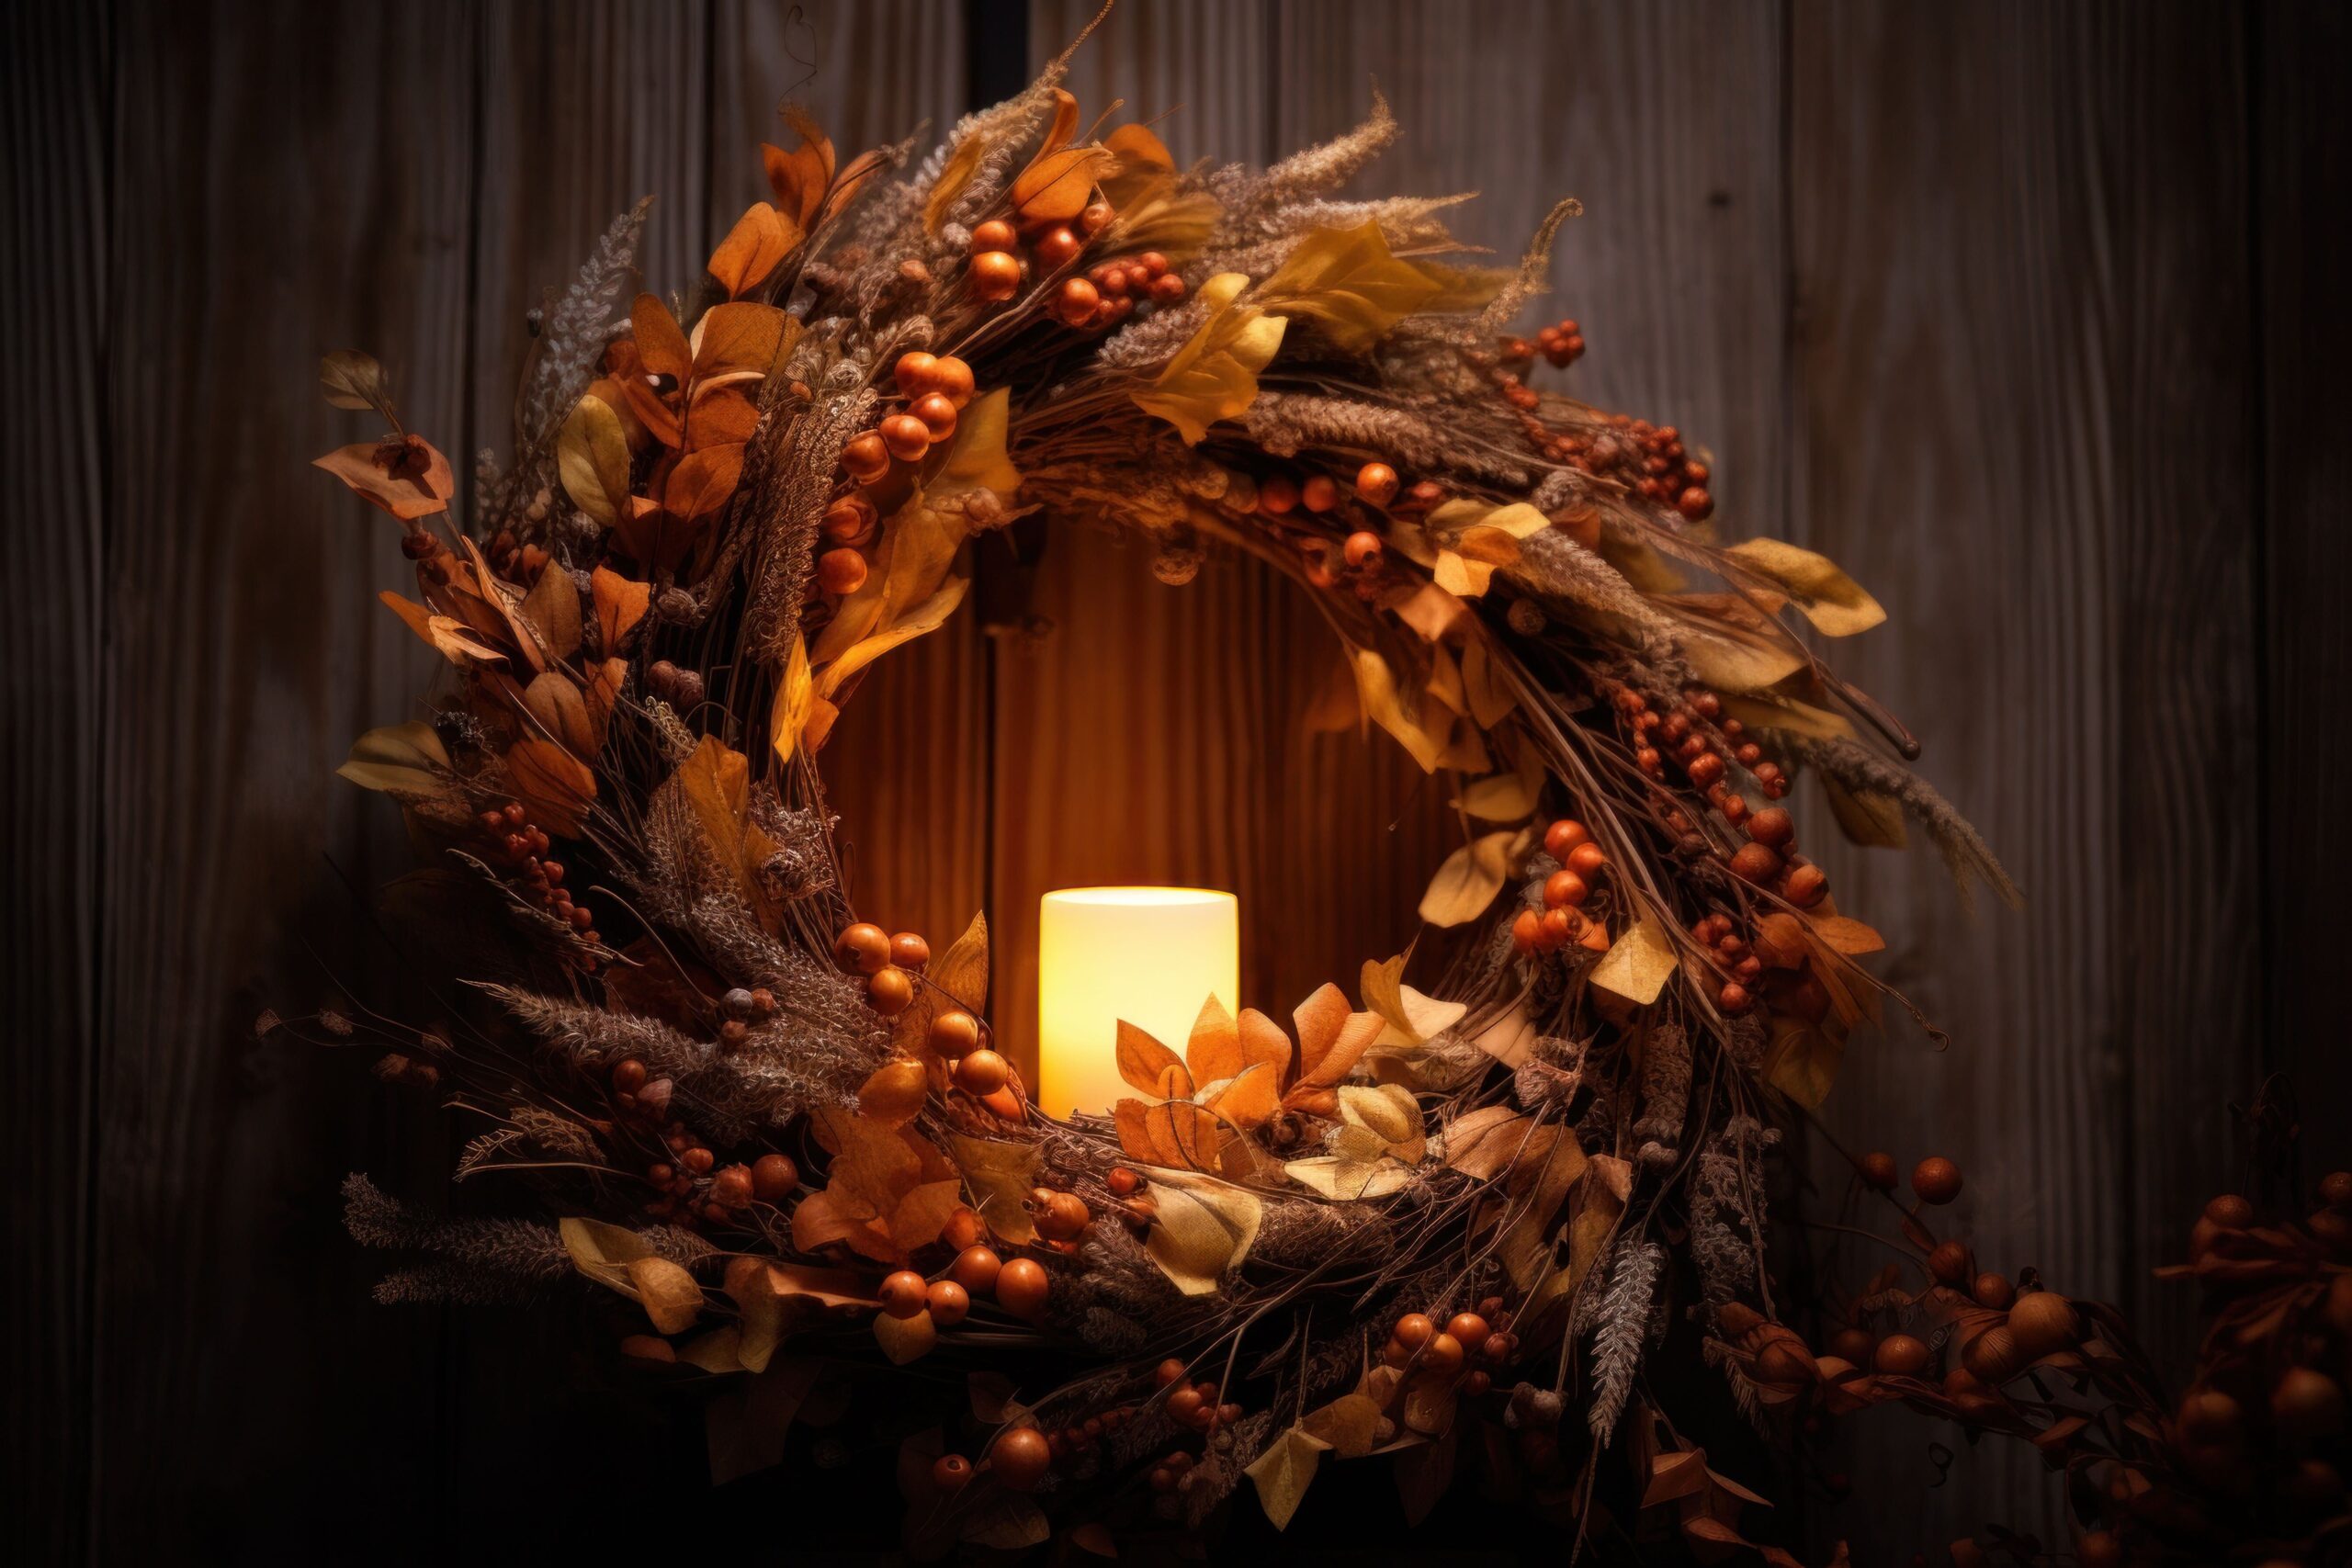 Fall wreaths with fern, leaves, berries and a candle